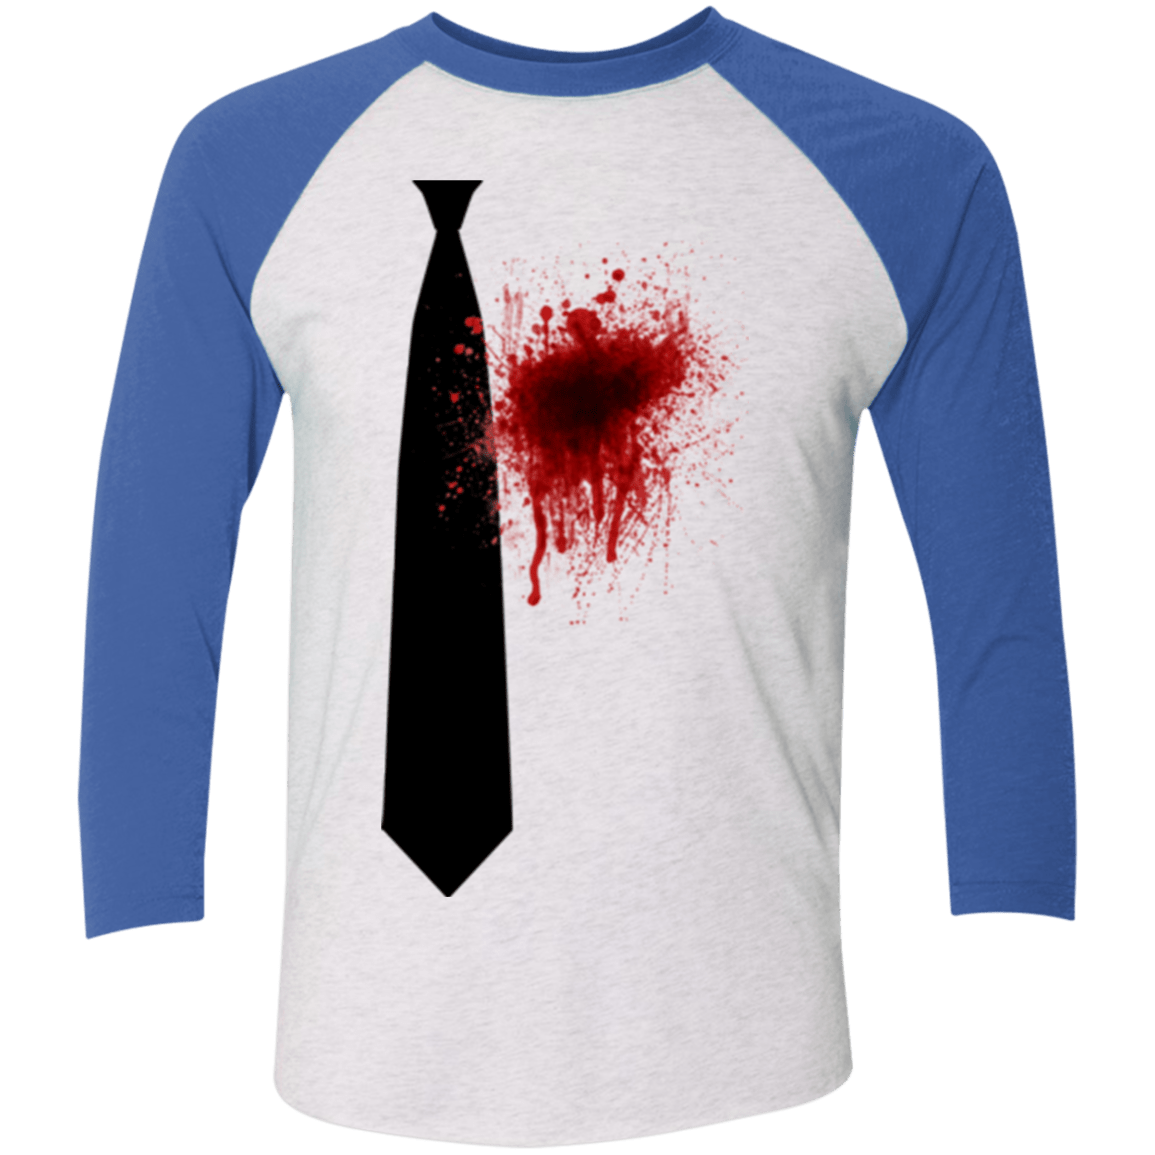 T-Shirts Heather White/Vintage Royal / X-Small Butcher tie Men's Triblend 3/4 Sleeve